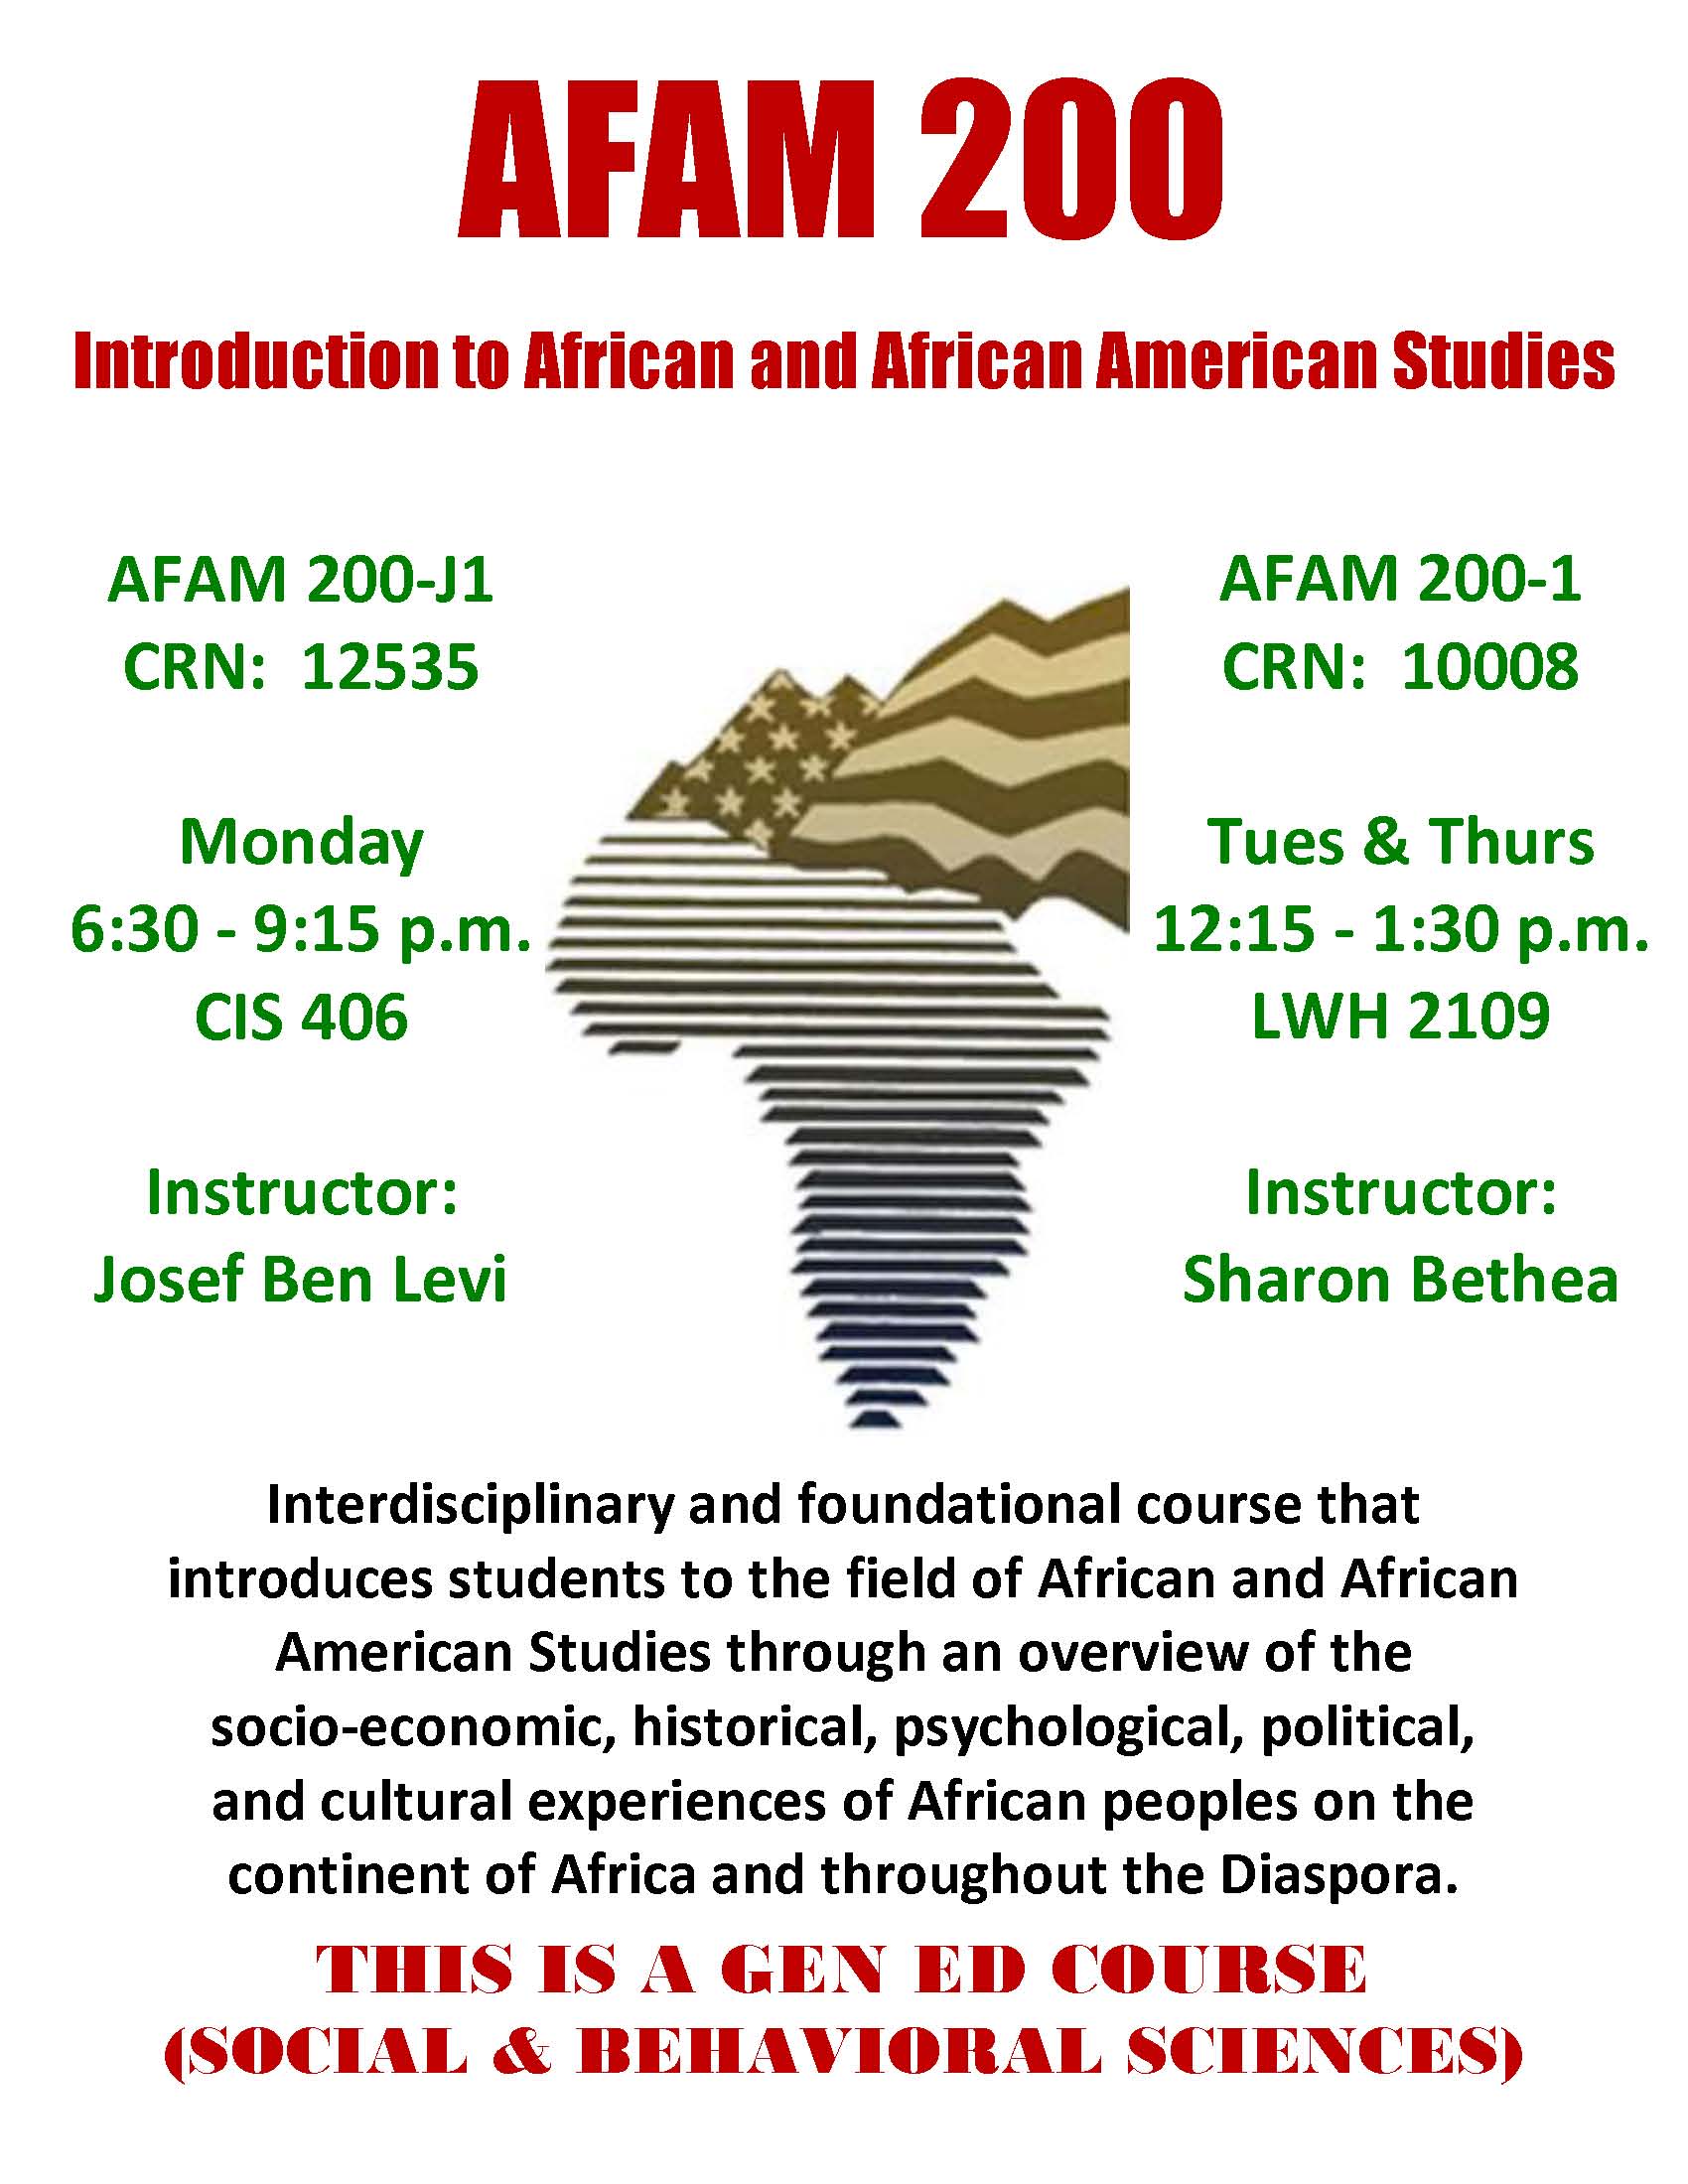 AFAM 200 INTRO TO AFRICAN & AFRICAN-AMERICAN STUDIES